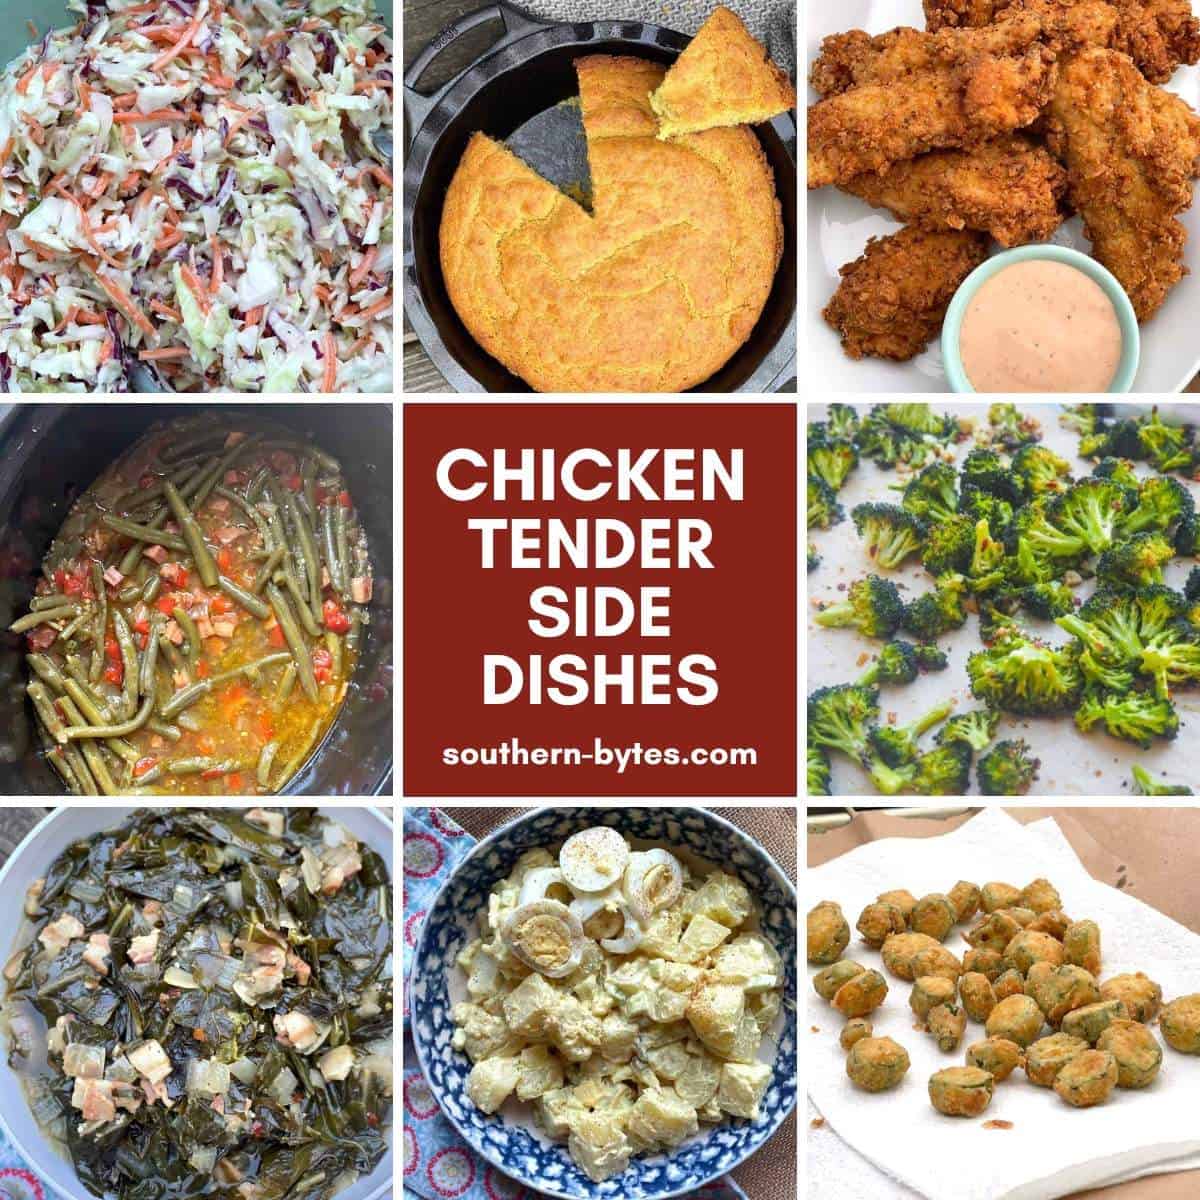 A collage of images showing fried chicken tender side dishes - coleslaw, green beans, veggies, and cornbread.